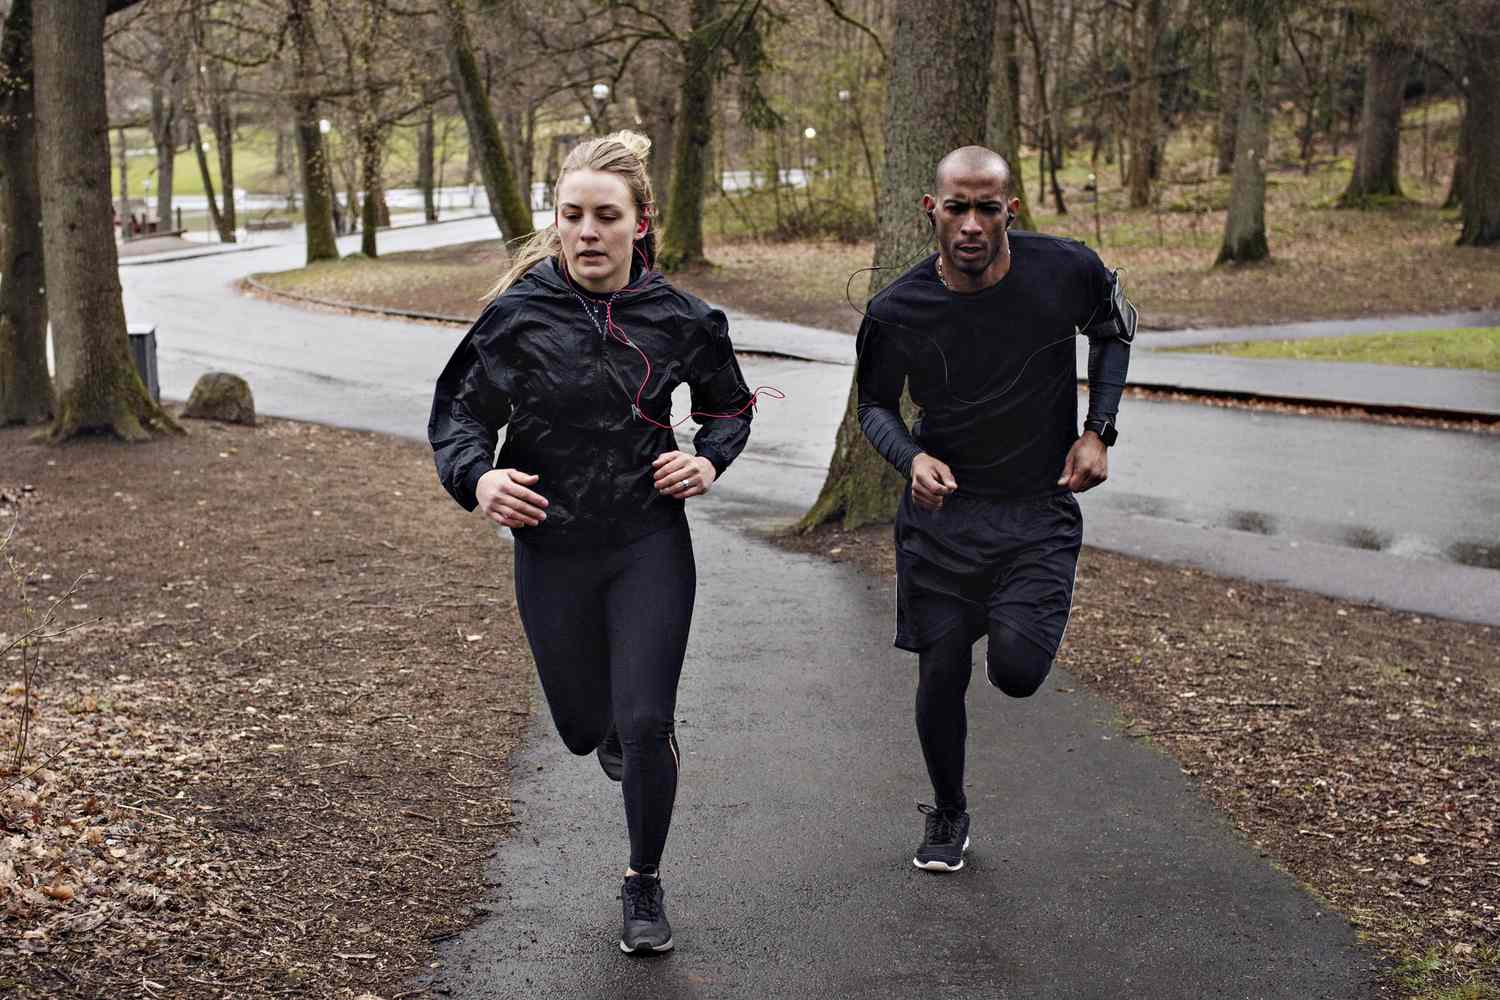 How To Train For 10K Run In 4 Weeks